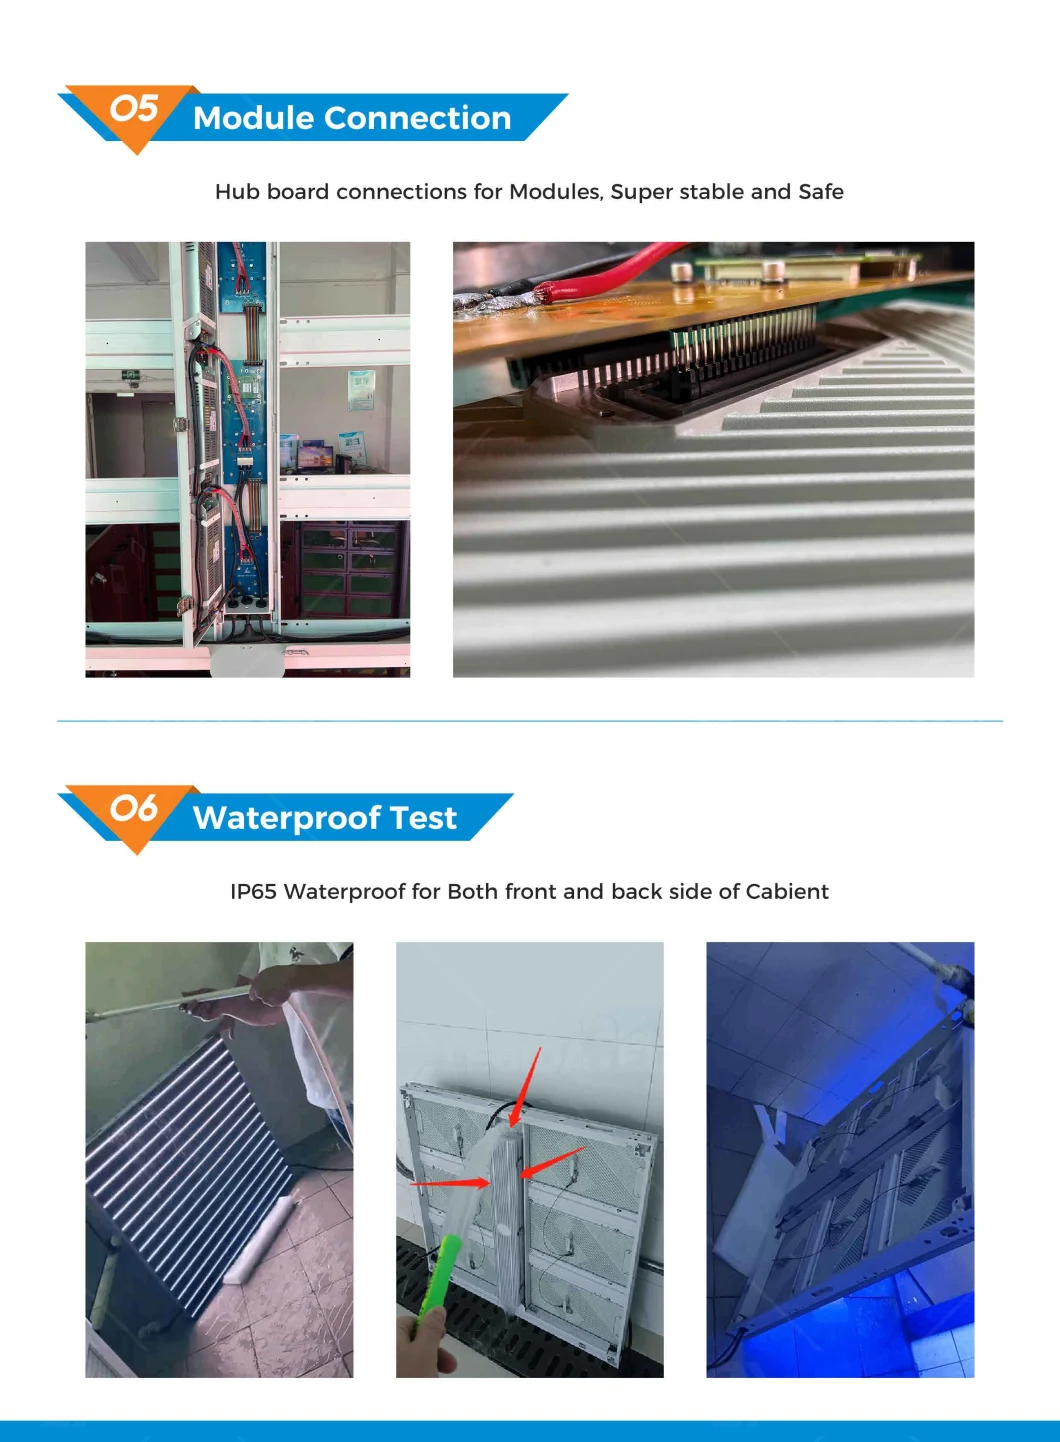 Naked Eye 3D P6 Nationstar Large RGB LED Screen Advertising Panel Signs Fixed Billboard Outdoor Smdled Display